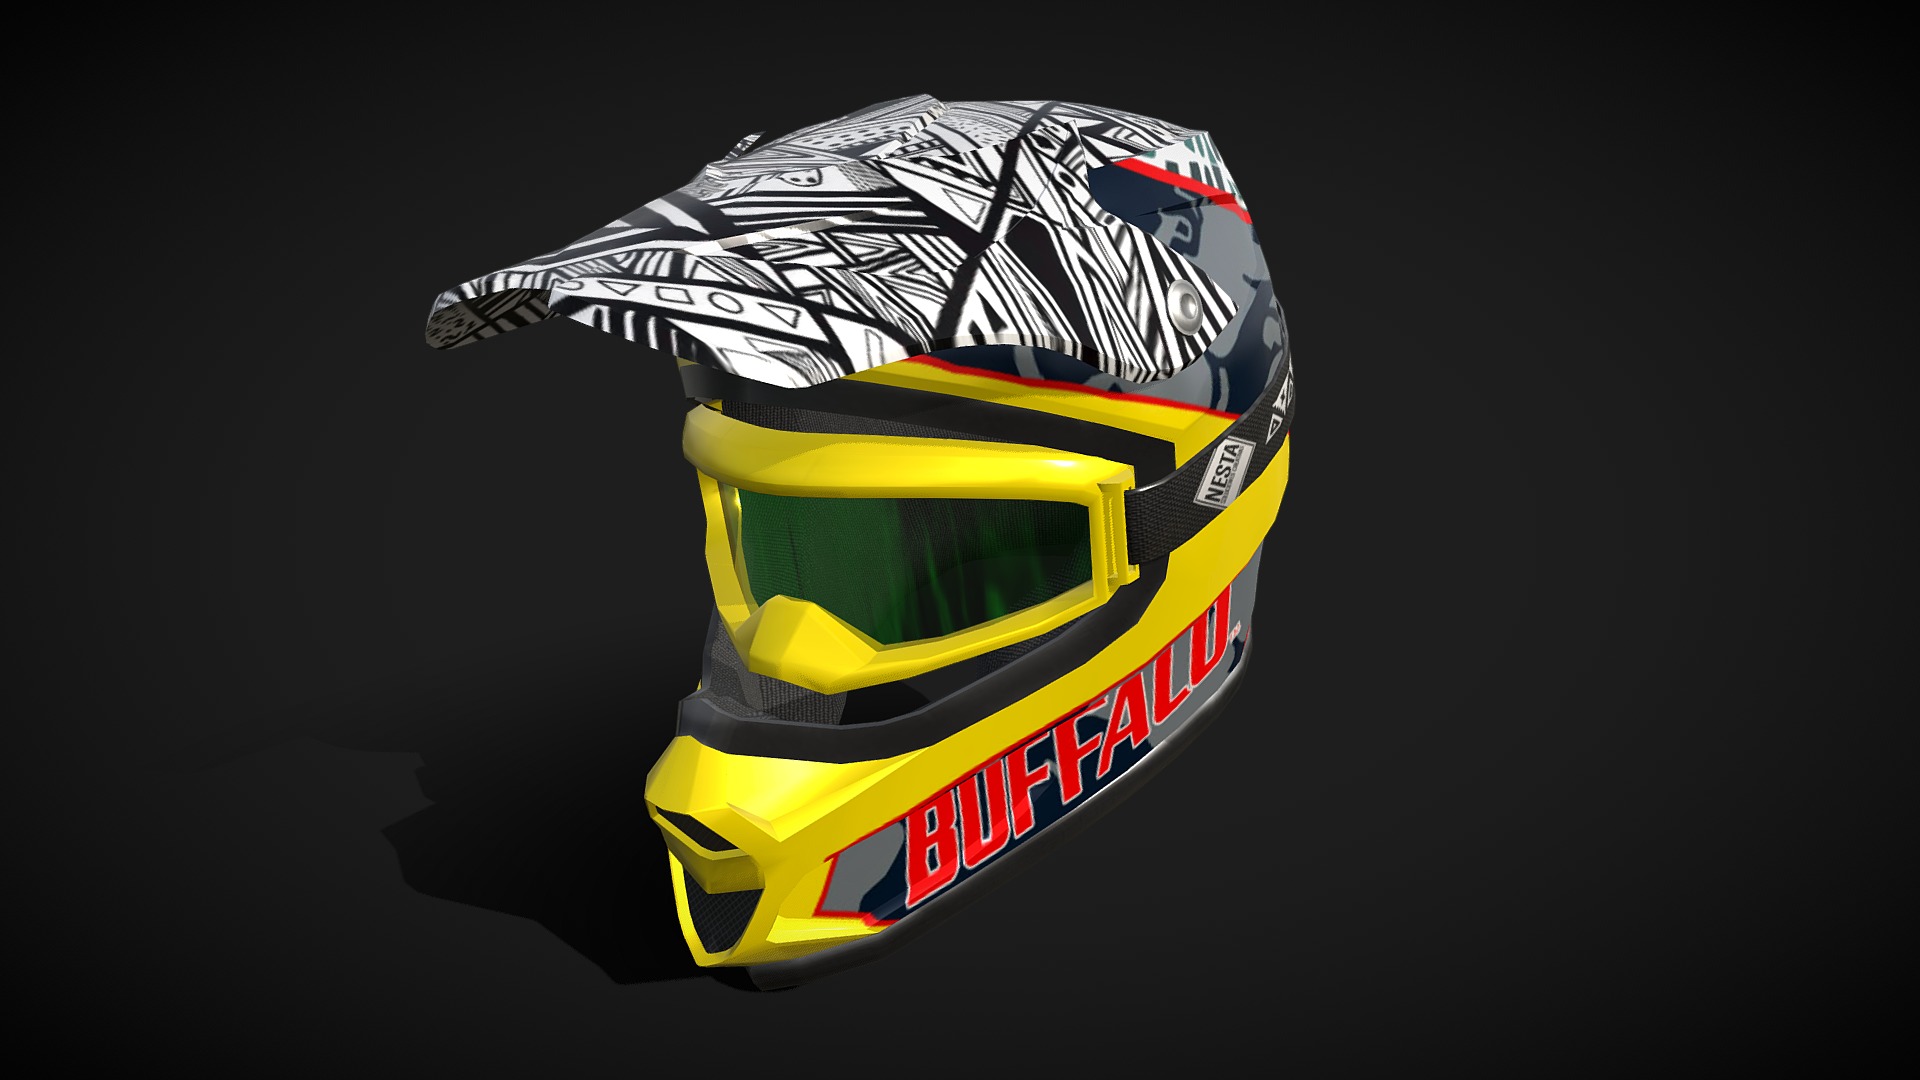 3D model Motocross - This is a 3D model of the Motocross. The 3D model is about a yellow and black helmet.